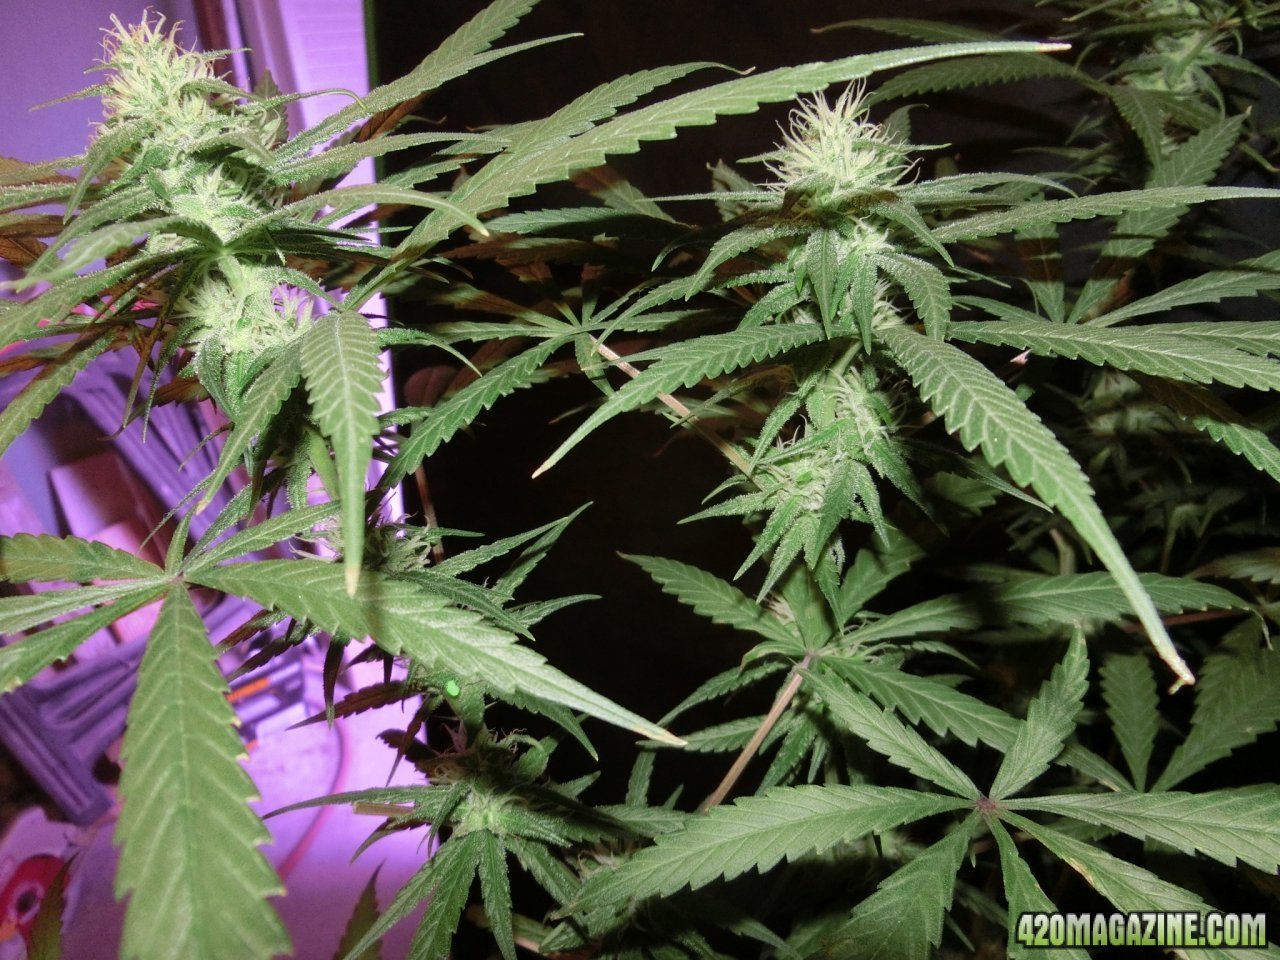 Day 84 GigaBud #3 Flower Day 36 - Gettin' There. Suckin' up nutrients and putting on bud.